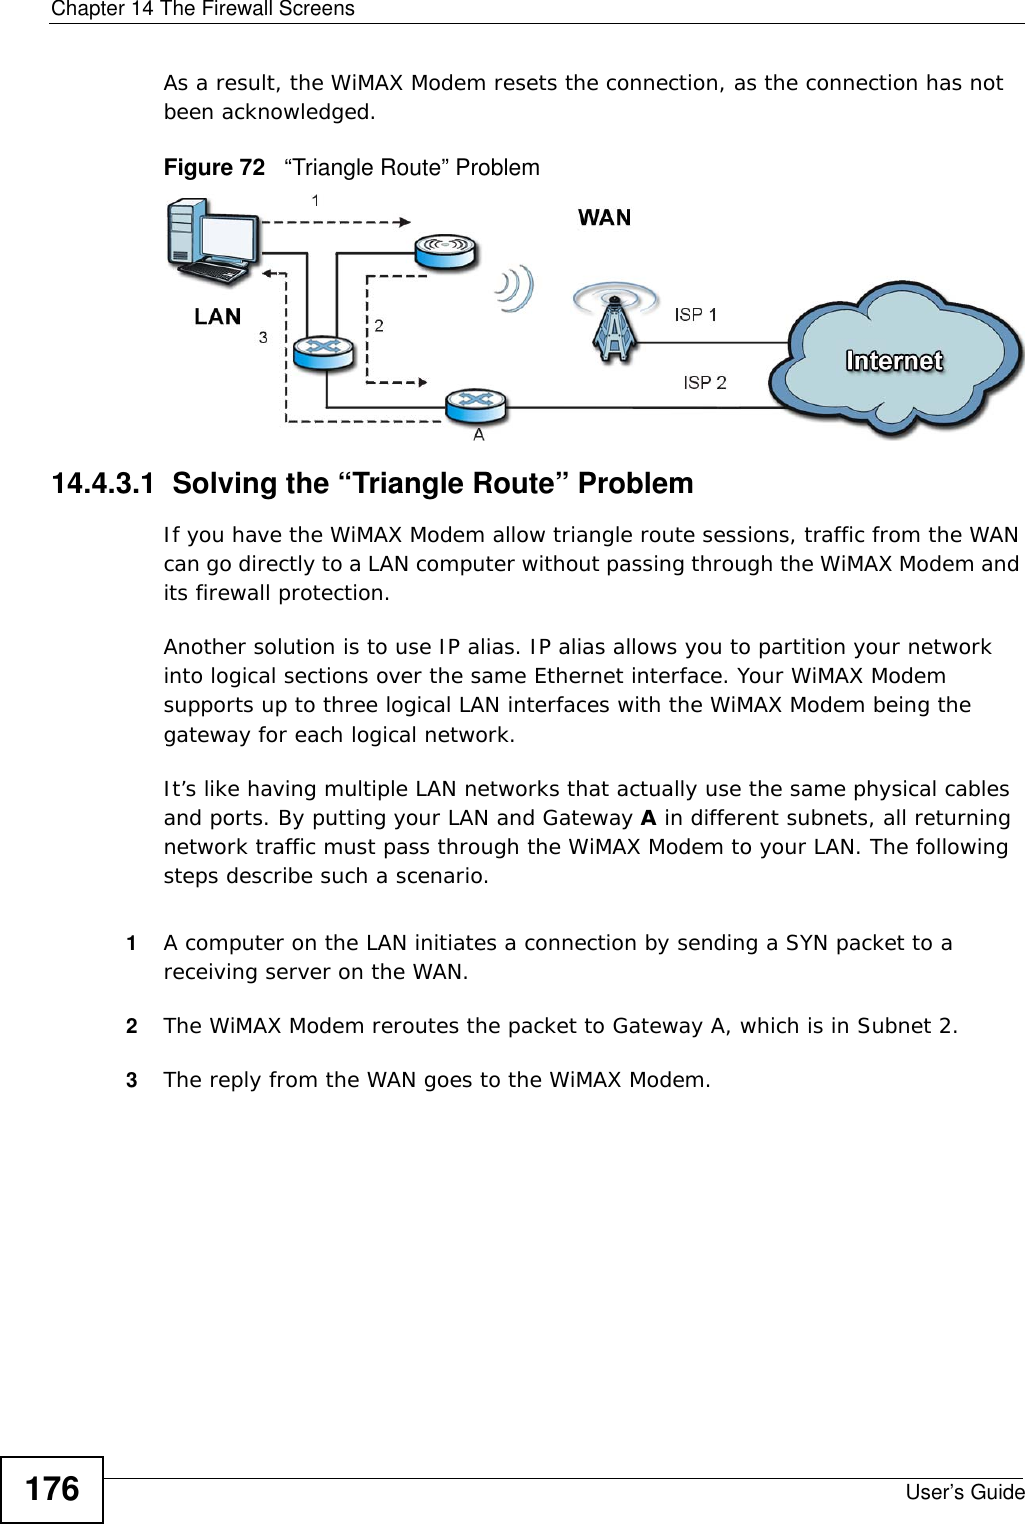 Chapter 14 The Firewall ScreensUser’s Guide176As a result, the WiMAX Modem resets the connection, as the connection has not been acknowledged.Figure 72   “Triangle Route” Problem14.4.3.1  Solving the “Triangle Route” ProblemIf you have the WiMAX Modem allow triangle route sessions, traffic from the WAN can go directly to a LAN computer without passing through the WiMAX Modem and its firewall protection. Another solution is to use IP alias. IP alias allows you to partition your network into logical sections over the same Ethernet interface. Your WiMAX Modem supports up to three logical LAN interfaces with the WiMAX Modem being the gateway for each logical network. It’s like having multiple LAN networks that actually use the same physical cables and ports. By putting your LAN and Gateway A in different subnets, all returning network traffic must pass through the WiMAX Modem to your LAN. The following steps describe such a scenario.1A computer on the LAN initiates a connection by sending a SYN packet to a receiving server on the WAN. 2The WiMAX Modem reroutes the packet to Gateway A, which is in Subnet 2. 3The reply from the WAN goes to the WiMAX Modem. 